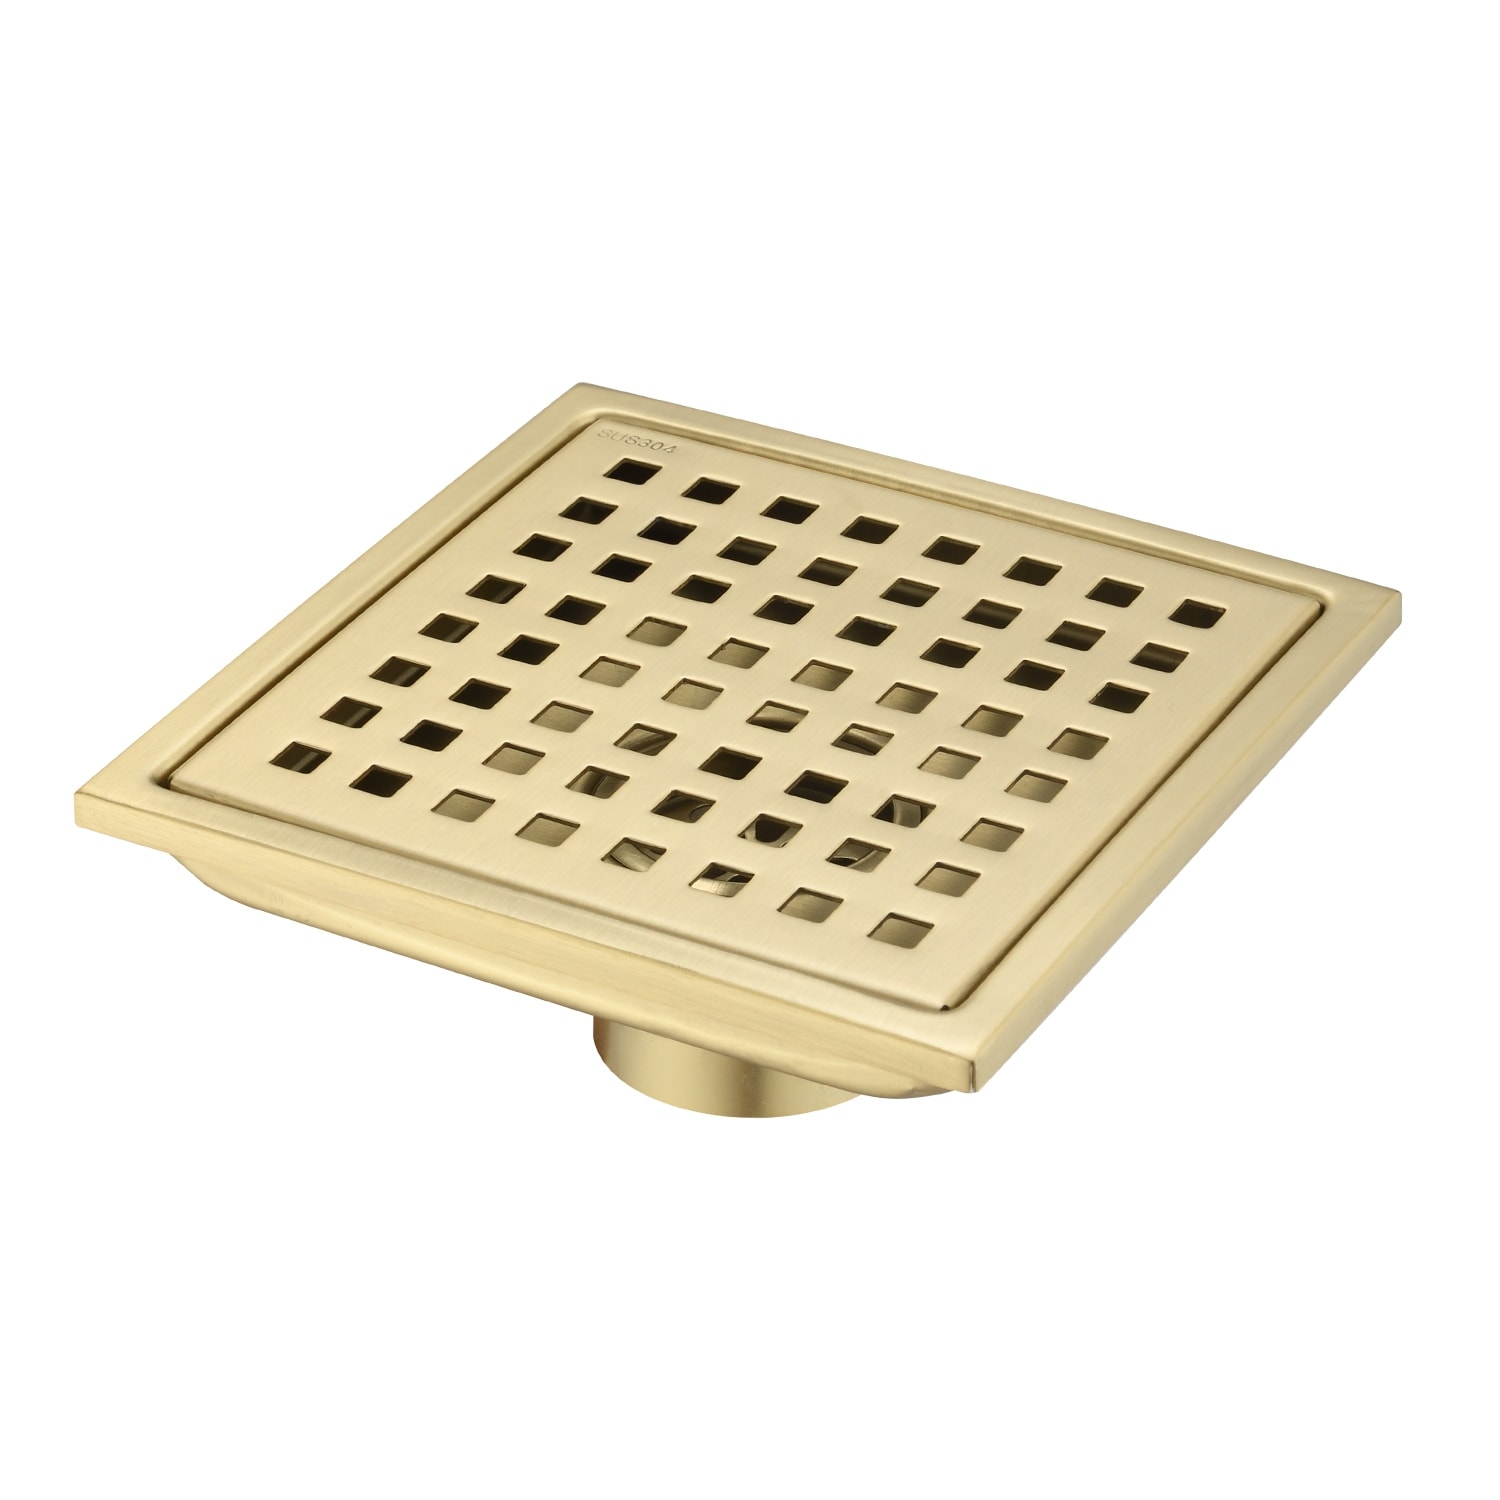 https://ak1.ostkcdn.com/images/products/is/images/direct/3f701b77204682e930a50350ef3be48ee56b34c5/Square-Shower-Floor-Drain-in-High-Quality-and-Durable-6x6x1-Inch-for-Kitchen%2C-Bathroom%2C-Garage%2C-Basement-and-Toilet.jpg